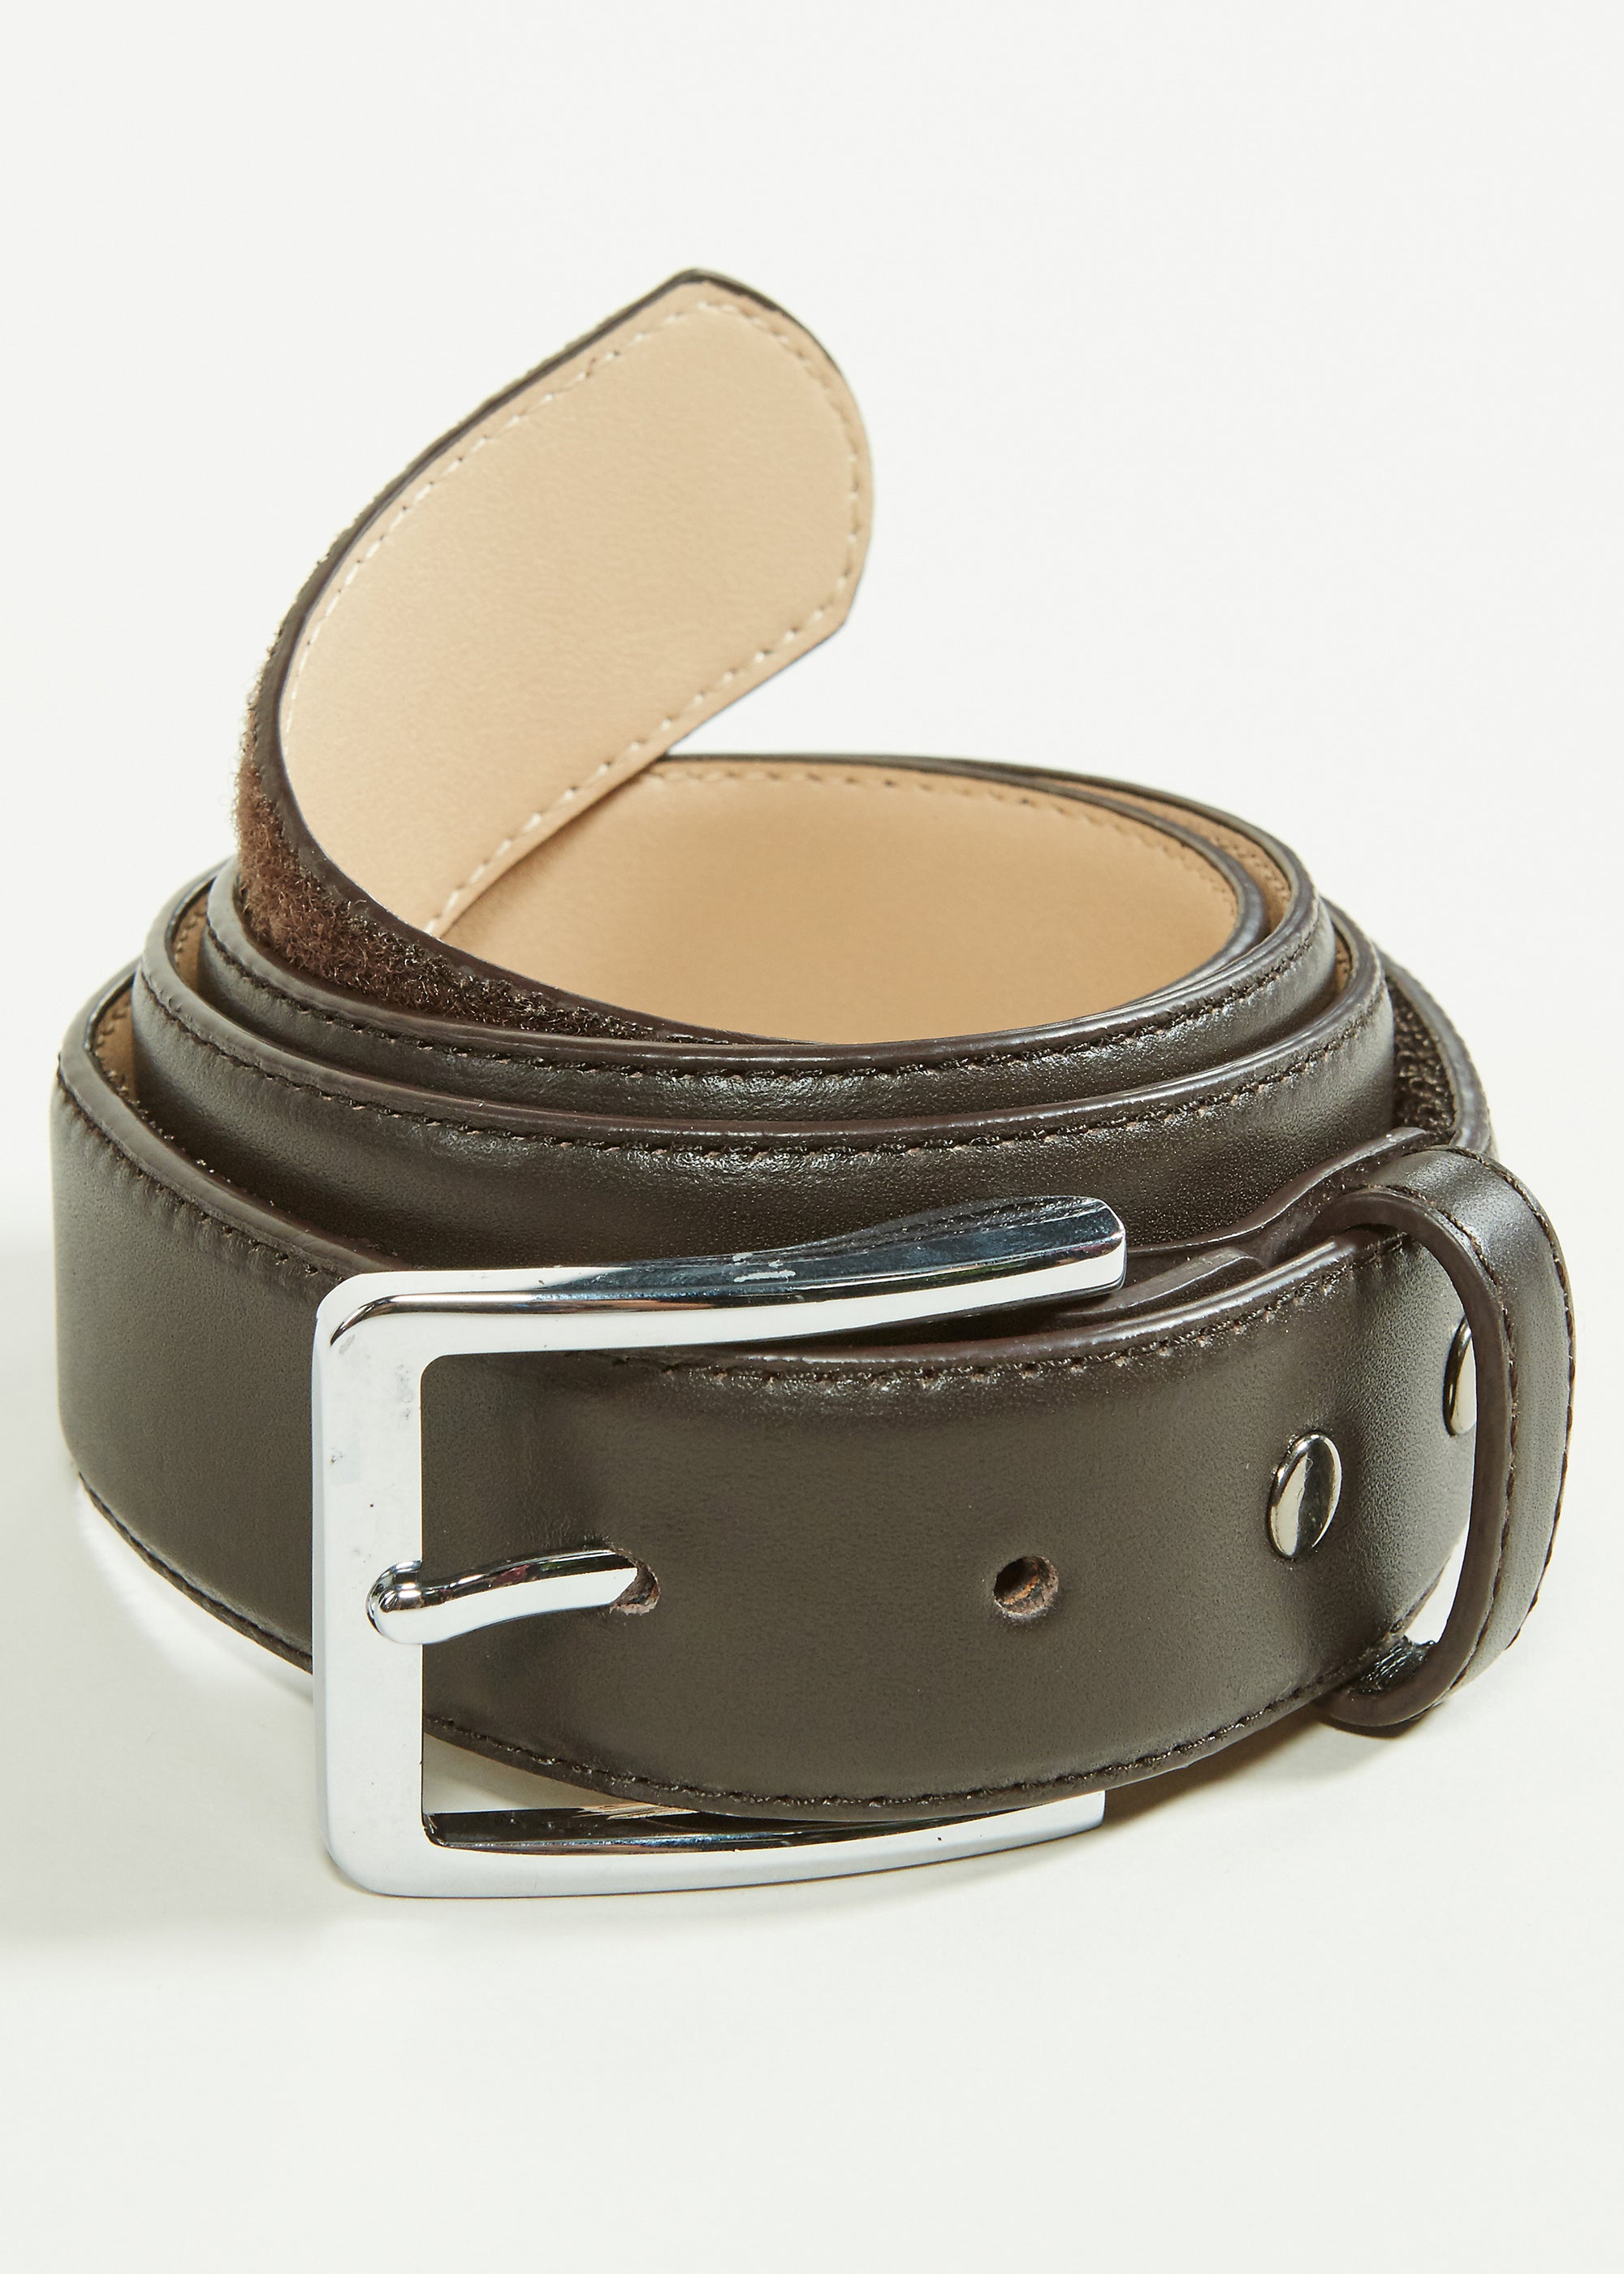 Able Leather velcro belt - brown